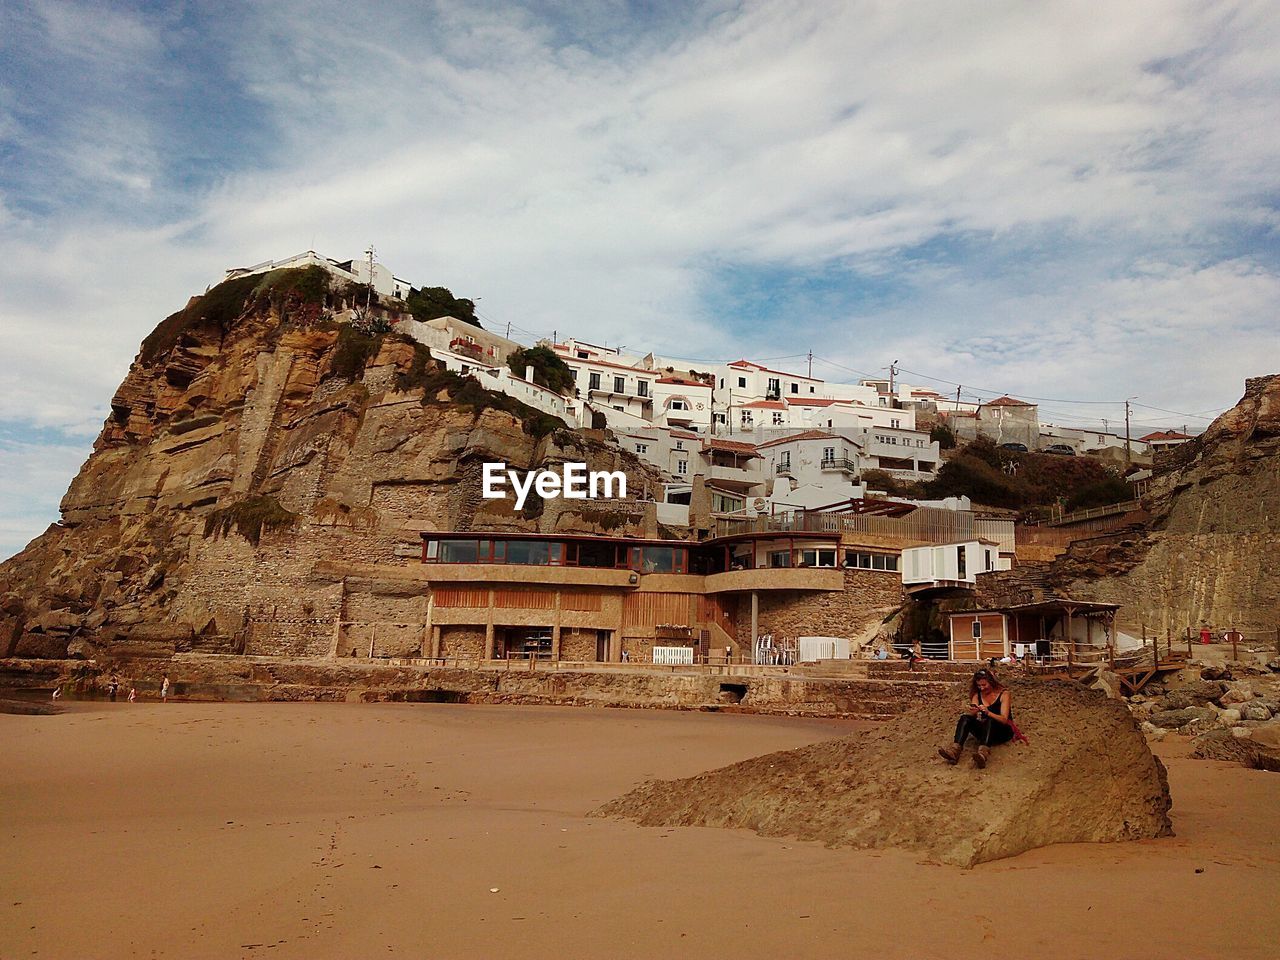 Woman sitting on rock against buildings at azenhas do mar